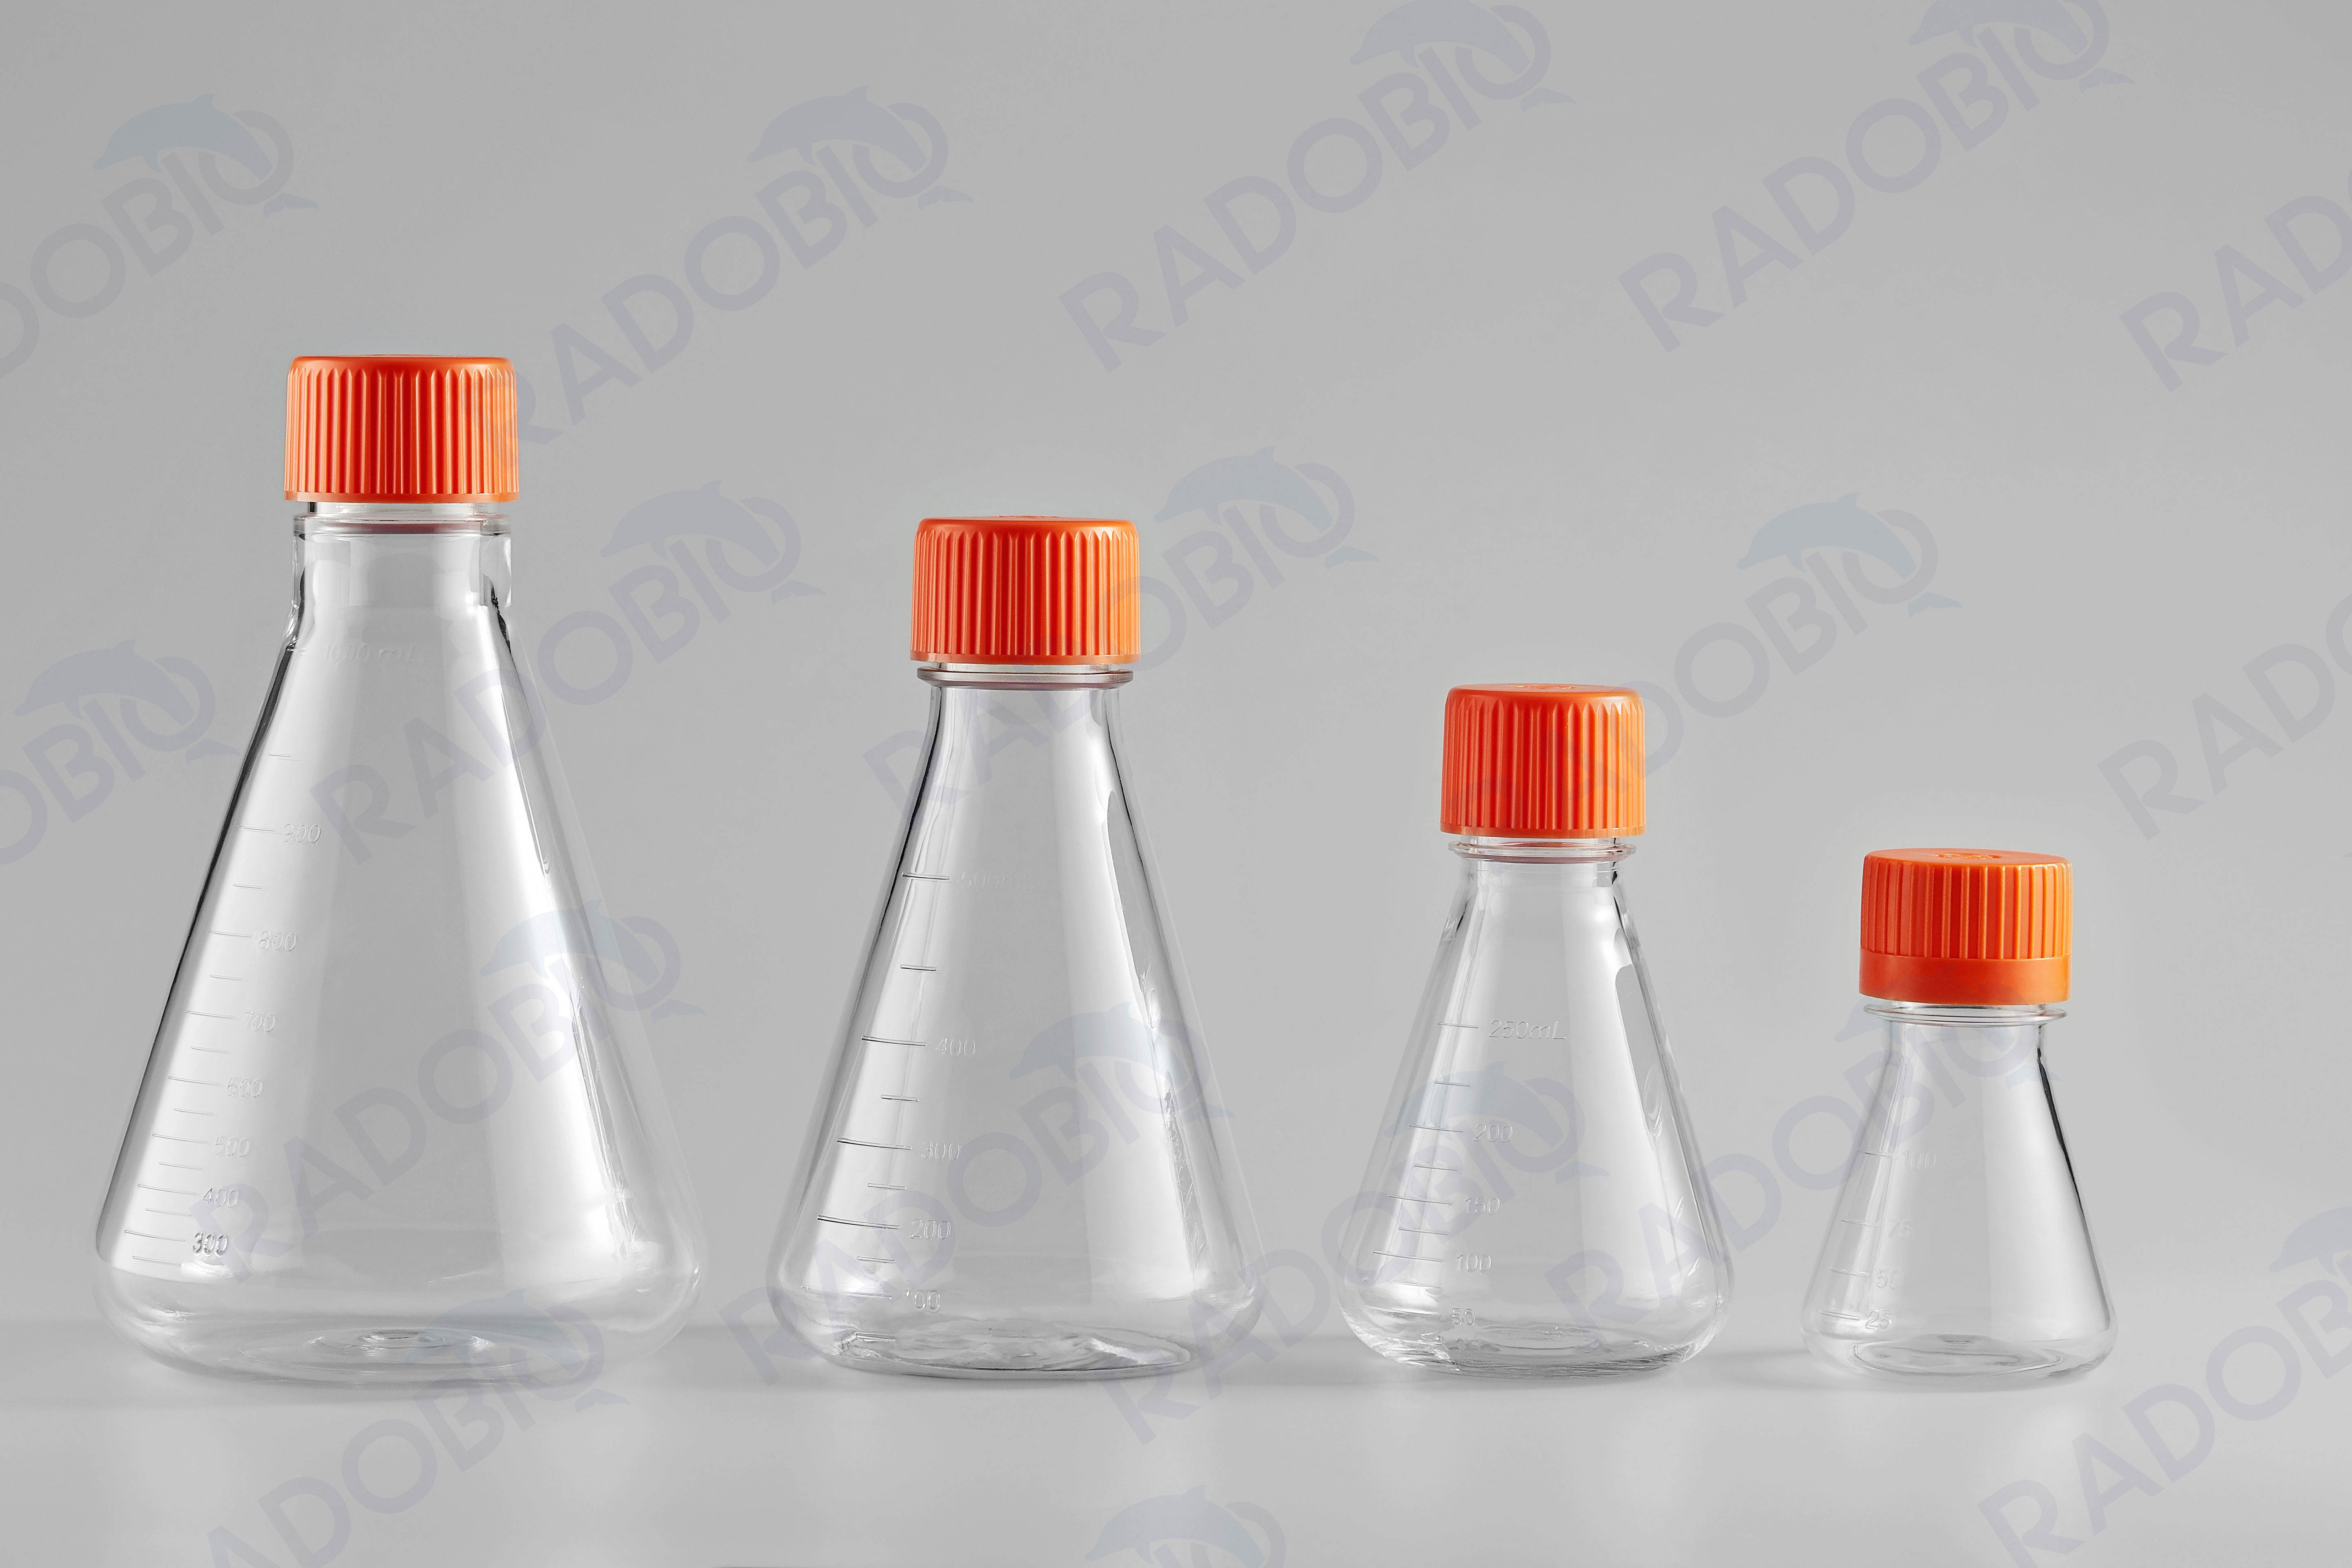 Cell culture Erlenmeyer flask Featured Image